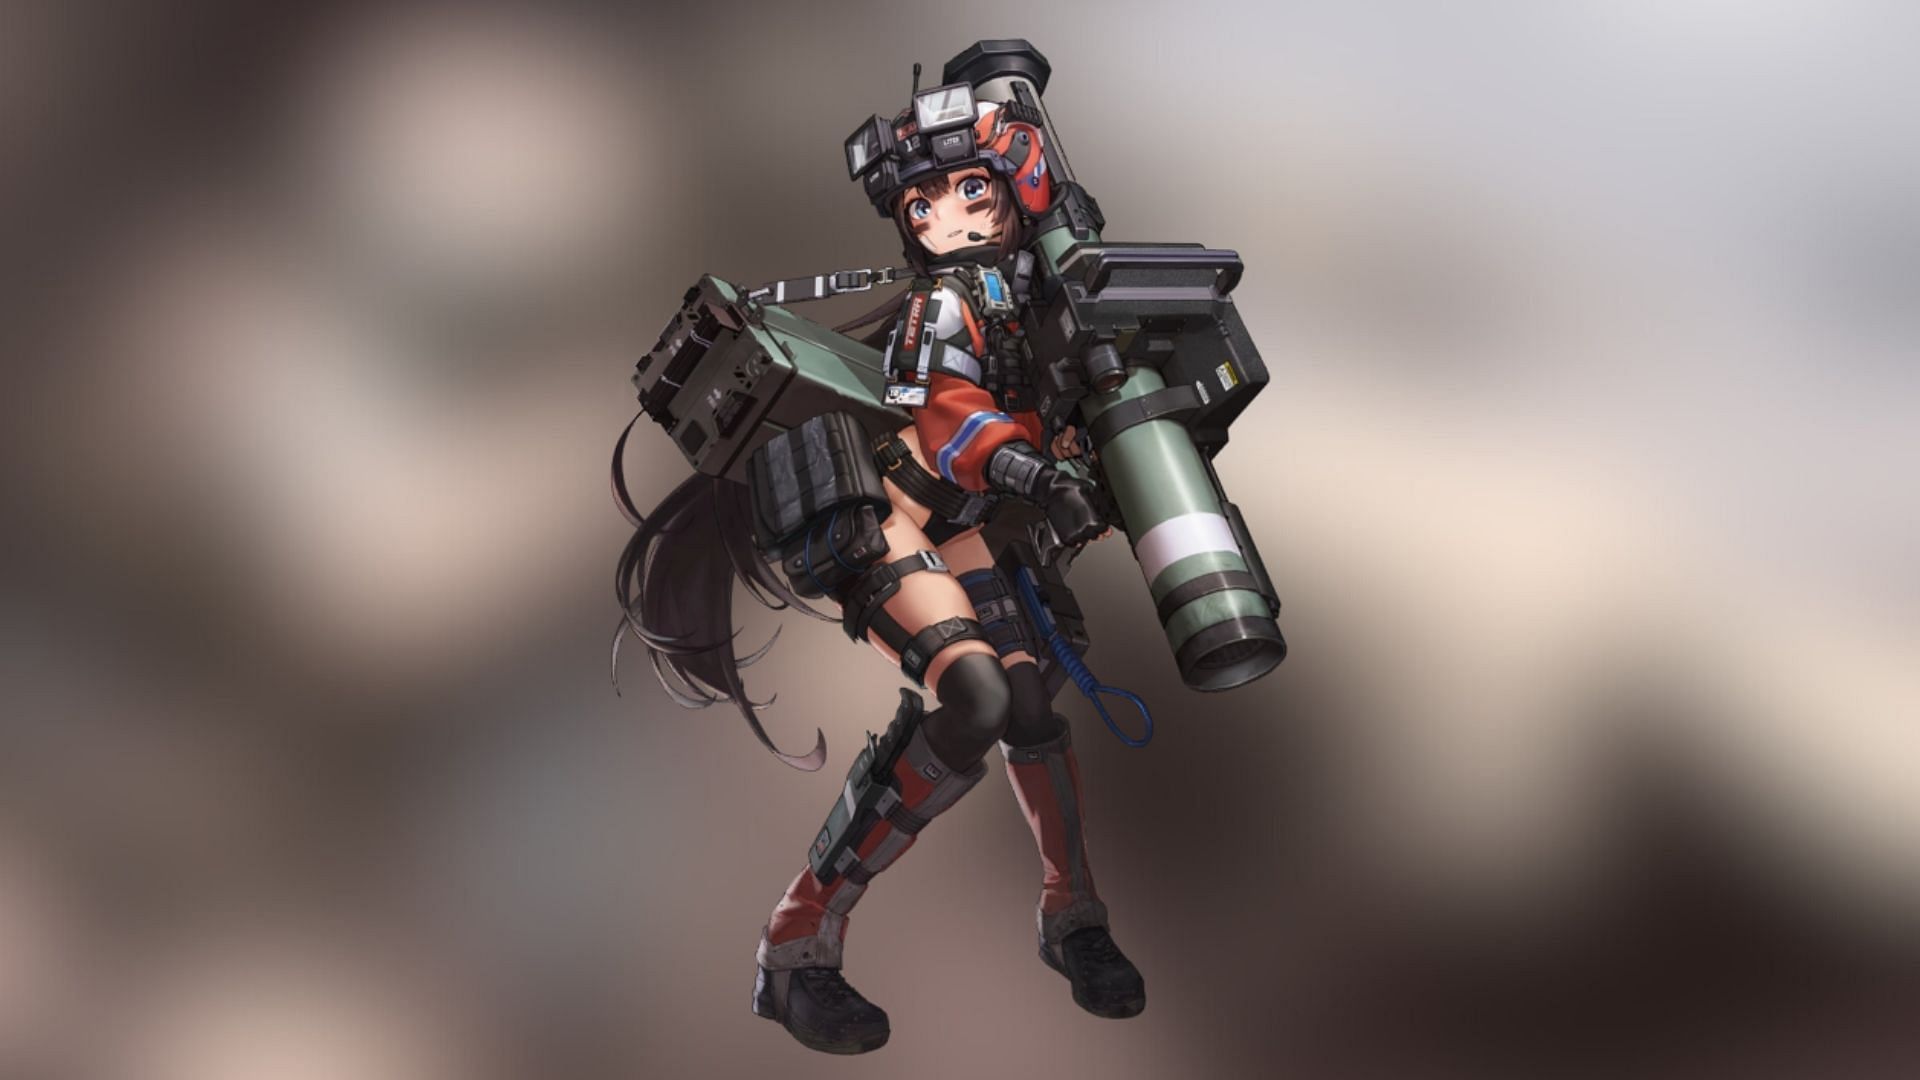 Mica is a support unit who uses Rocket Launcher. (Image via Shift Up)